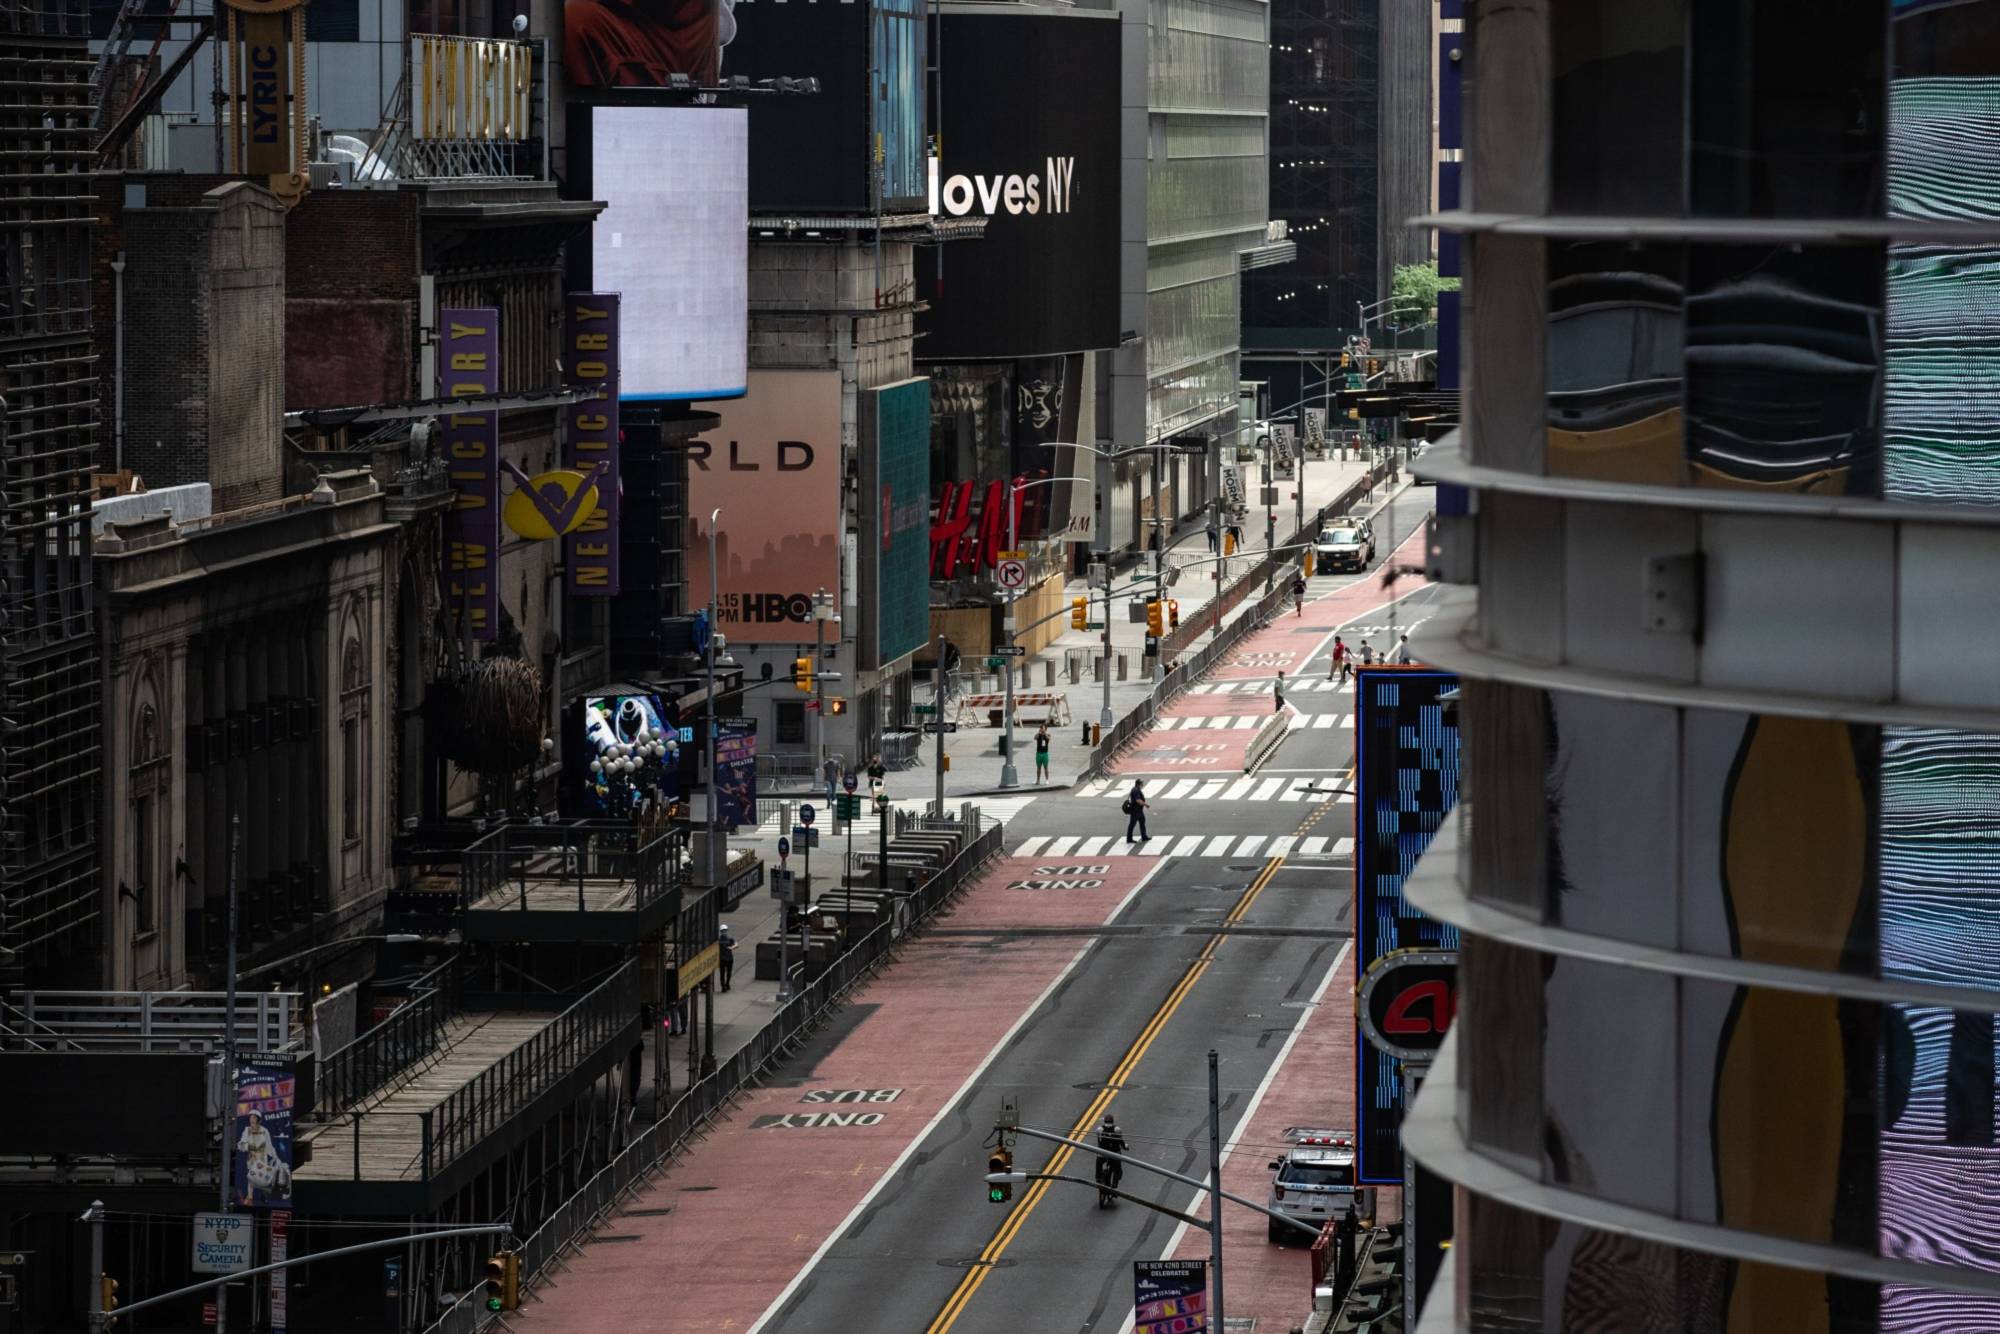 A nearly empty street is seen in Times Square on June 11, days after New York City's lockdown eased. New research shows that economic losses have come mainly from fear, not government mandates.  | BLOOMBERG